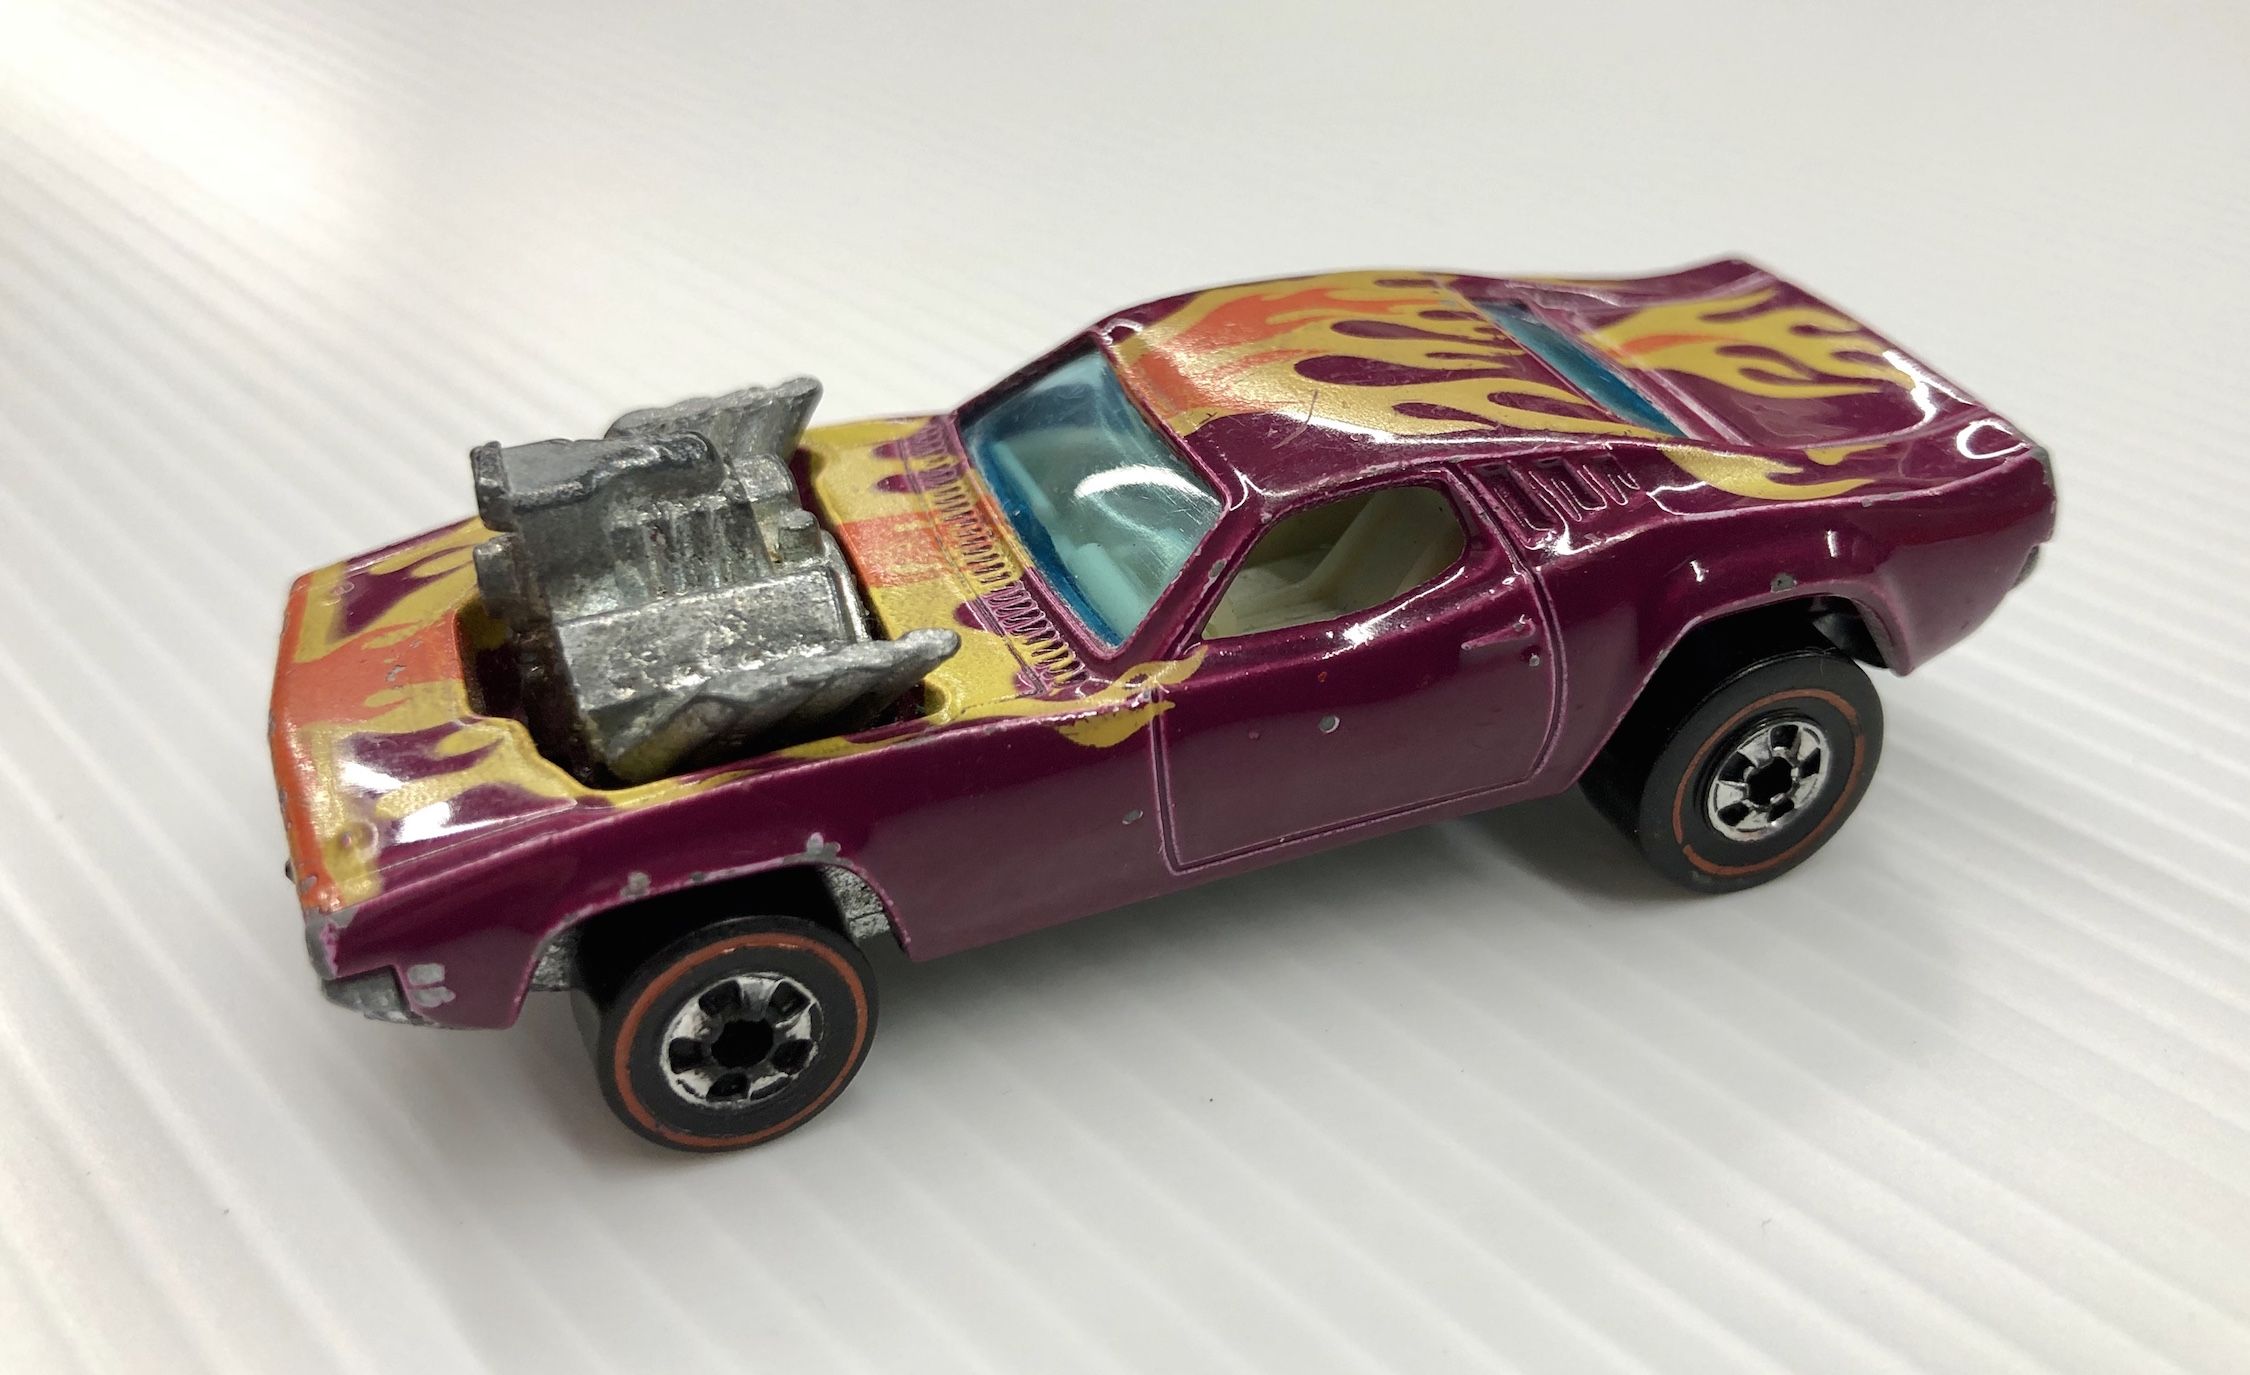 10 most valuable hot wheels